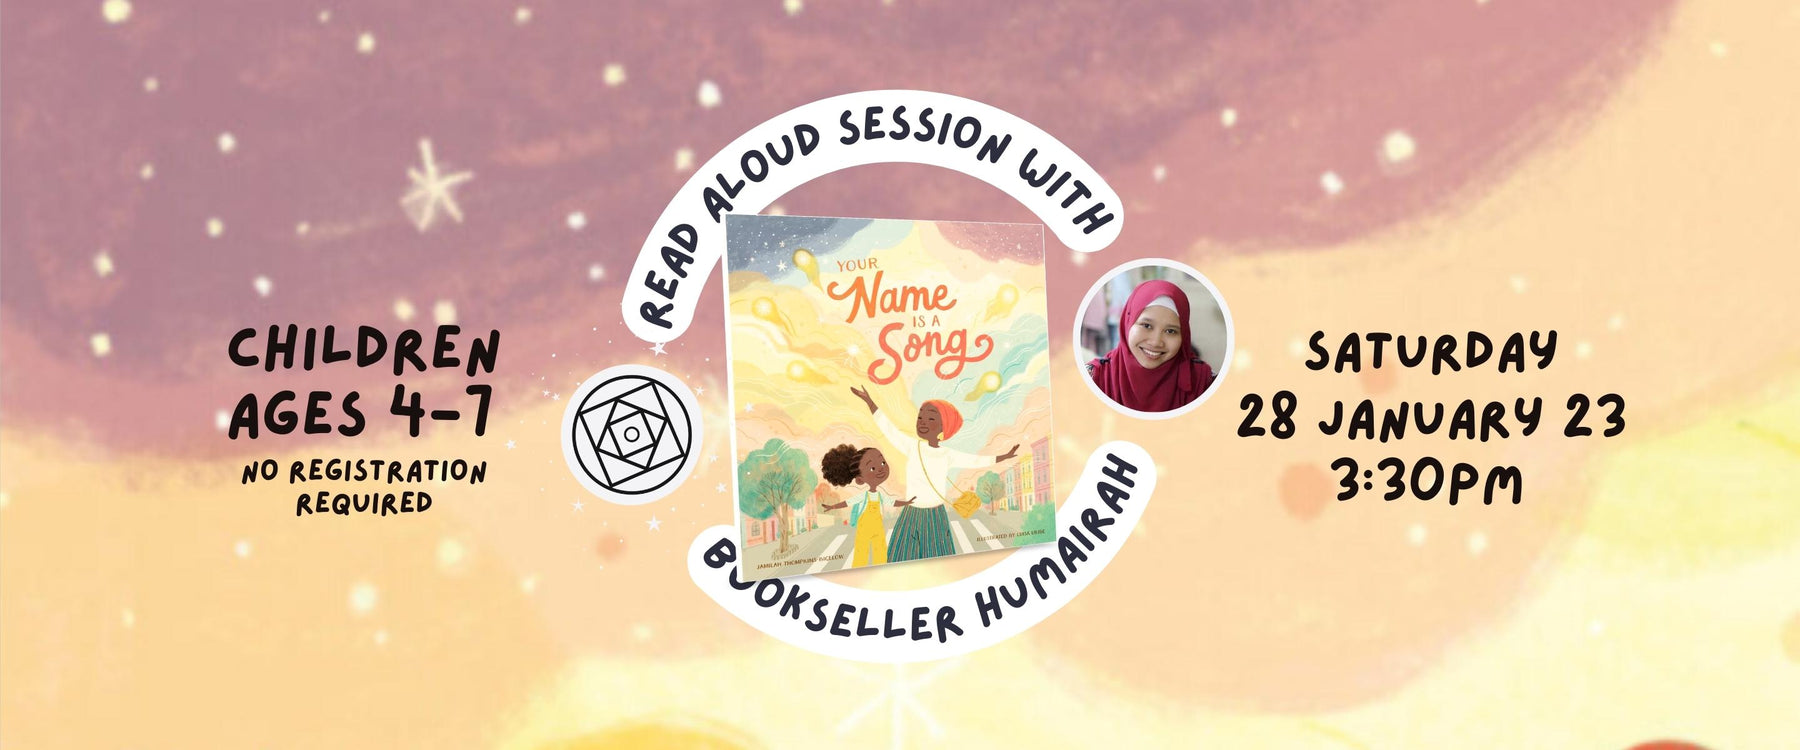 Read-Aloud Session with Bookseller Humairah